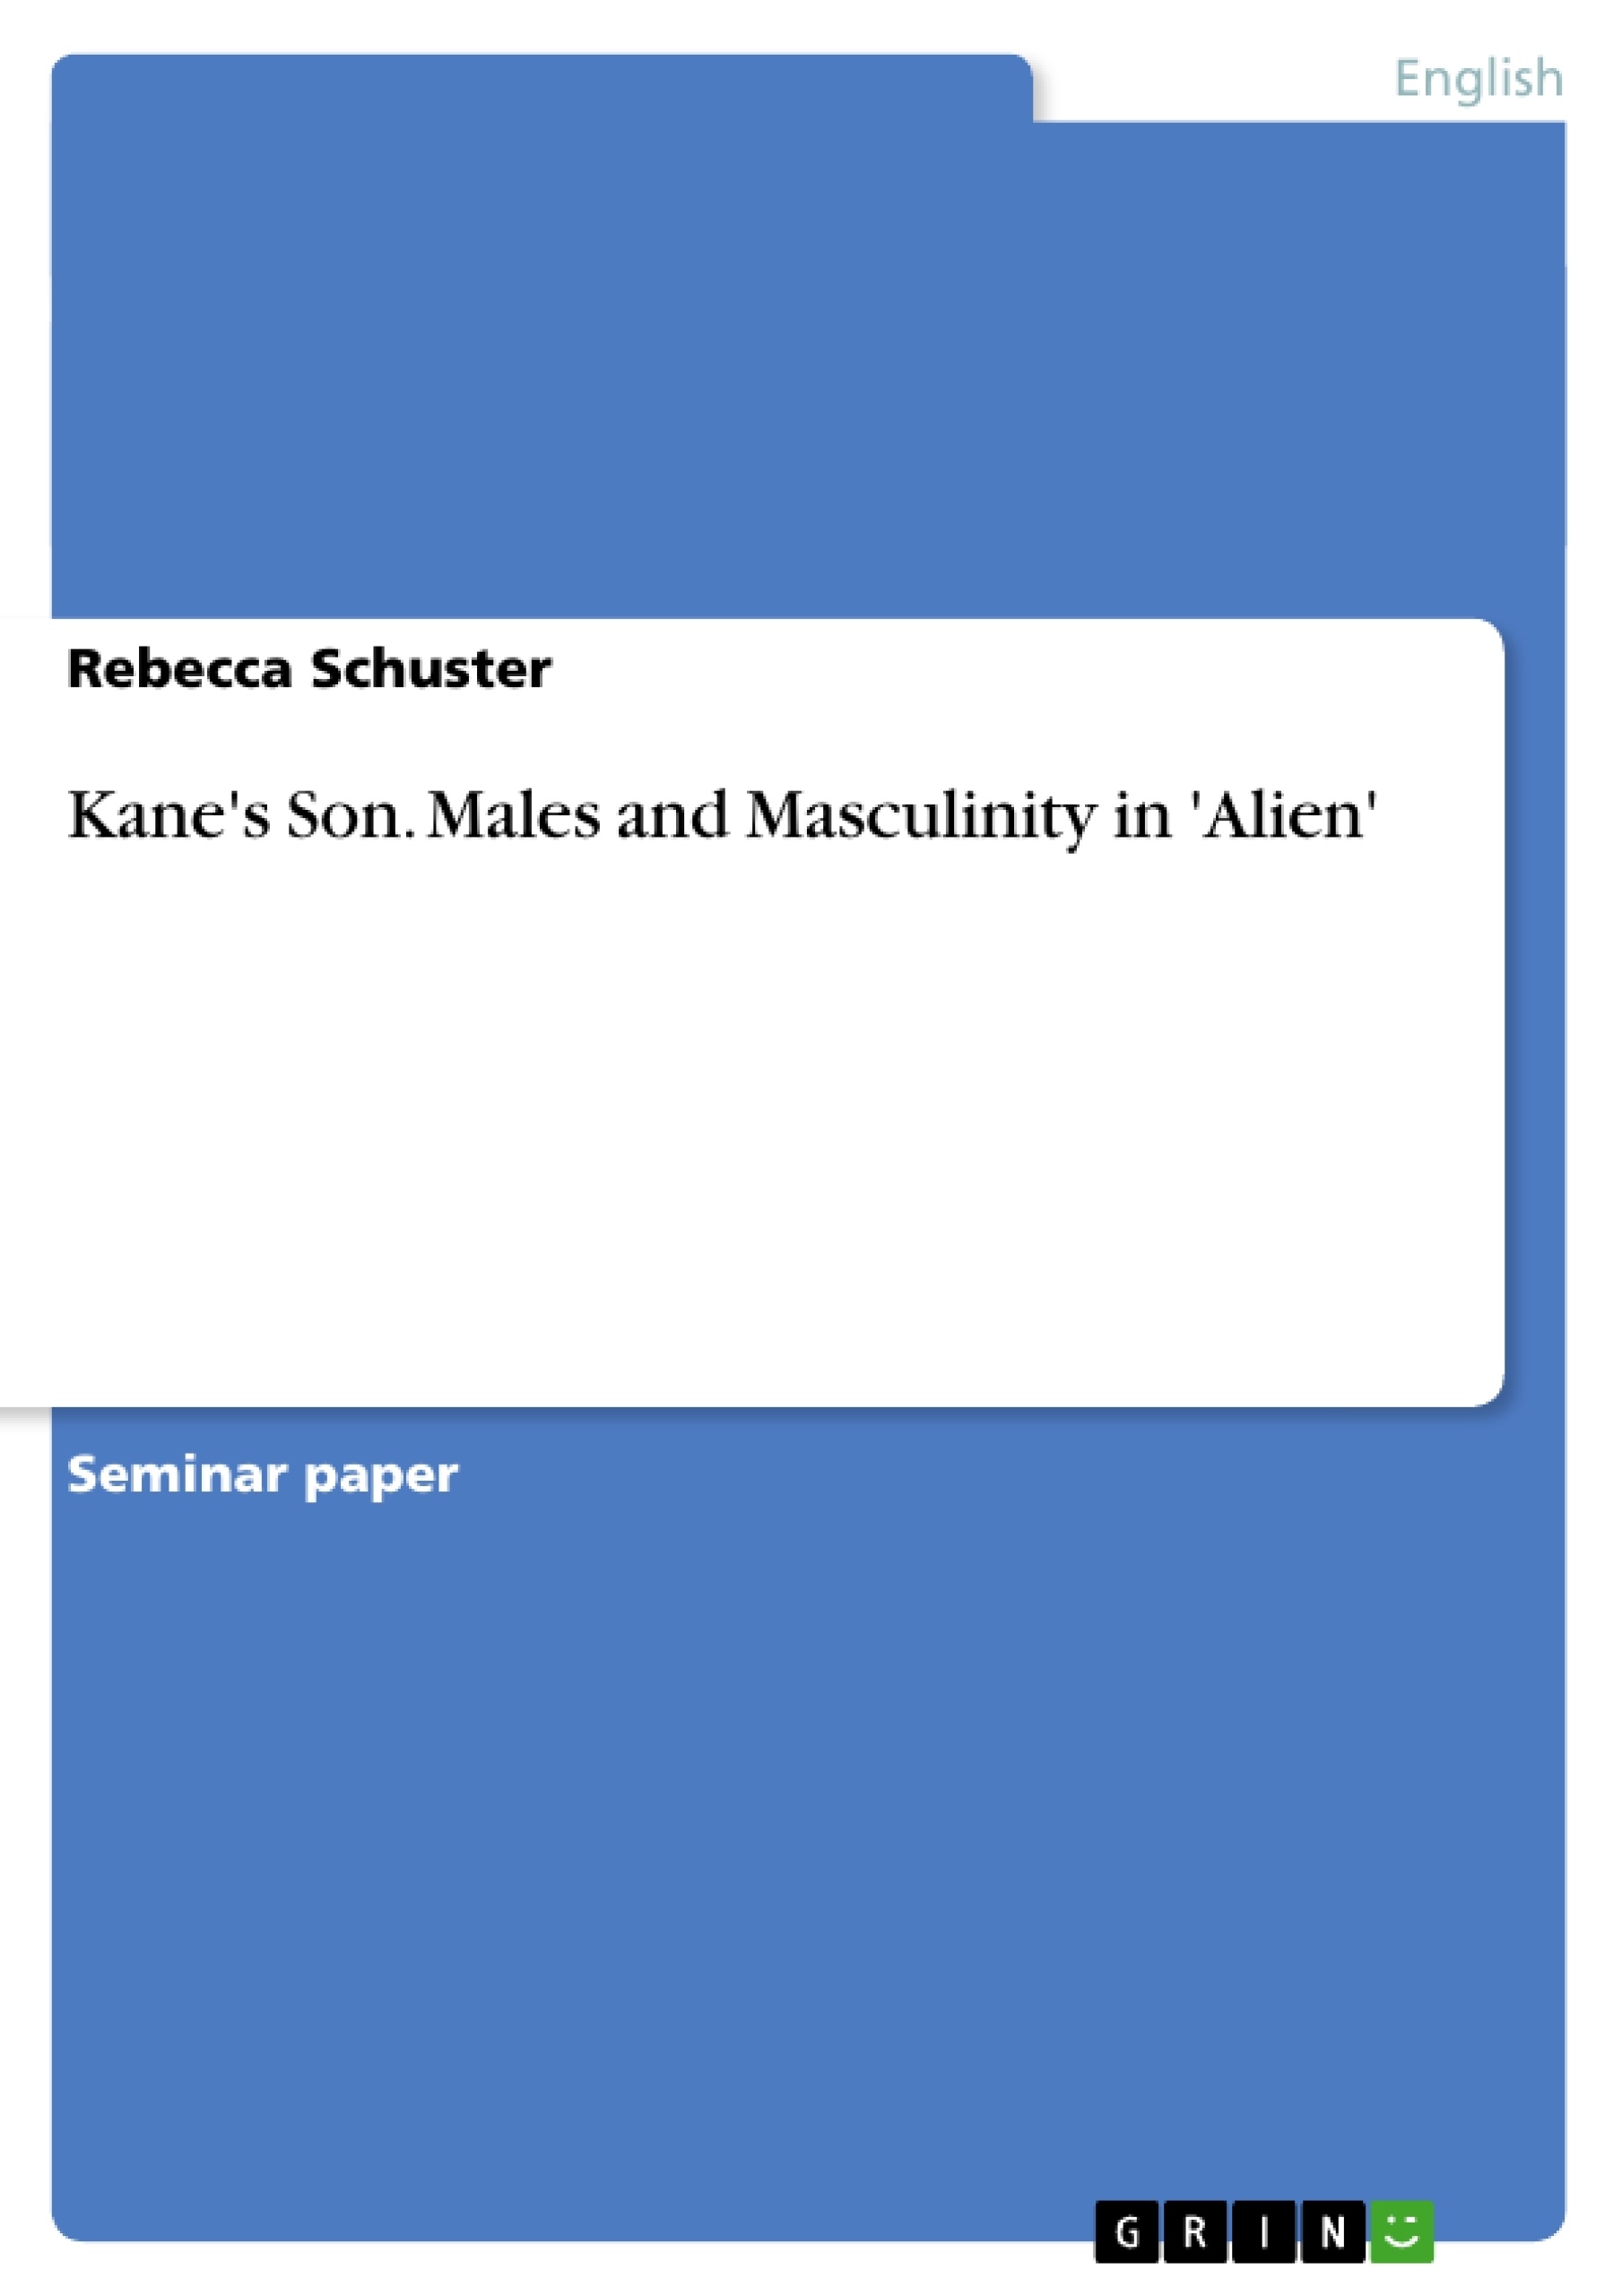 Title: Kane's Son. Males and Masculinity in 'Alien'